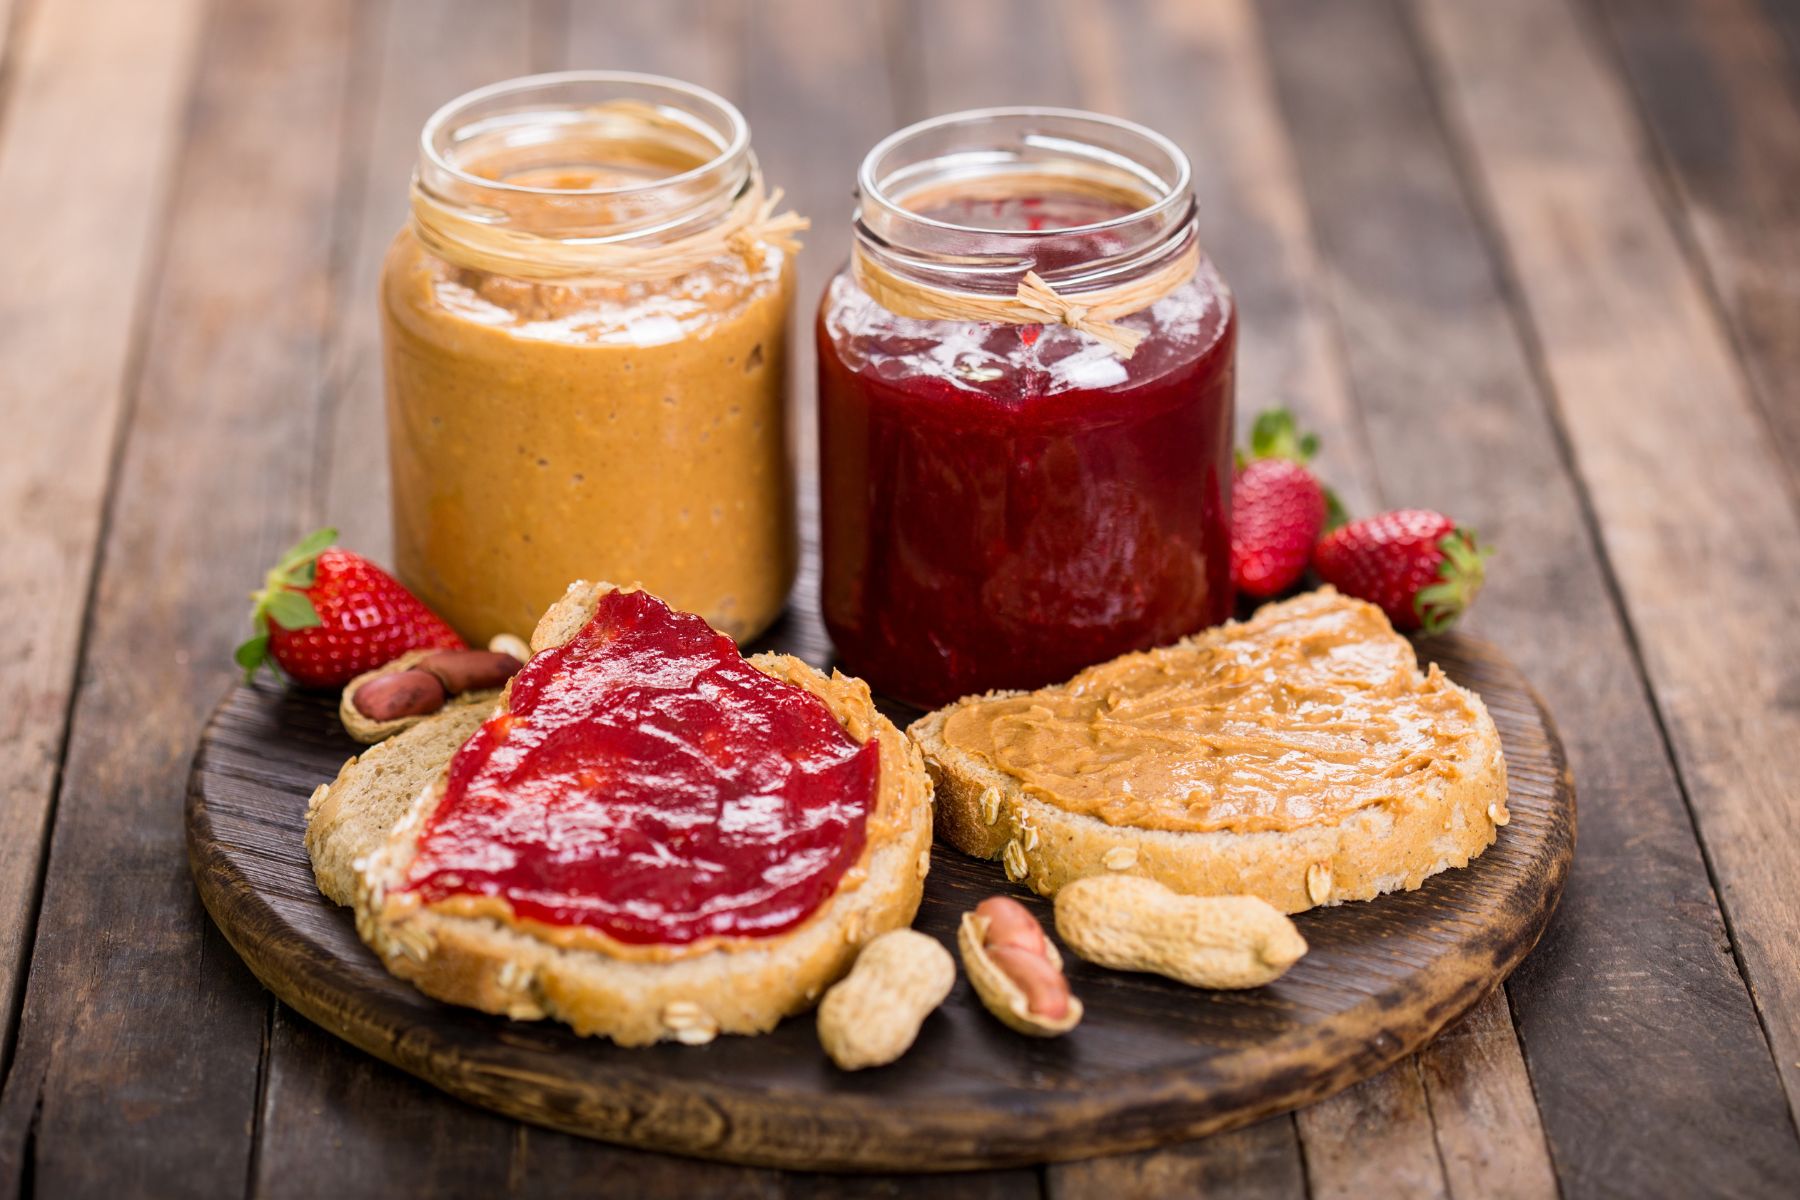 A peanut butter jelly sandwich on a plate with peanut butter and jelly in jars.